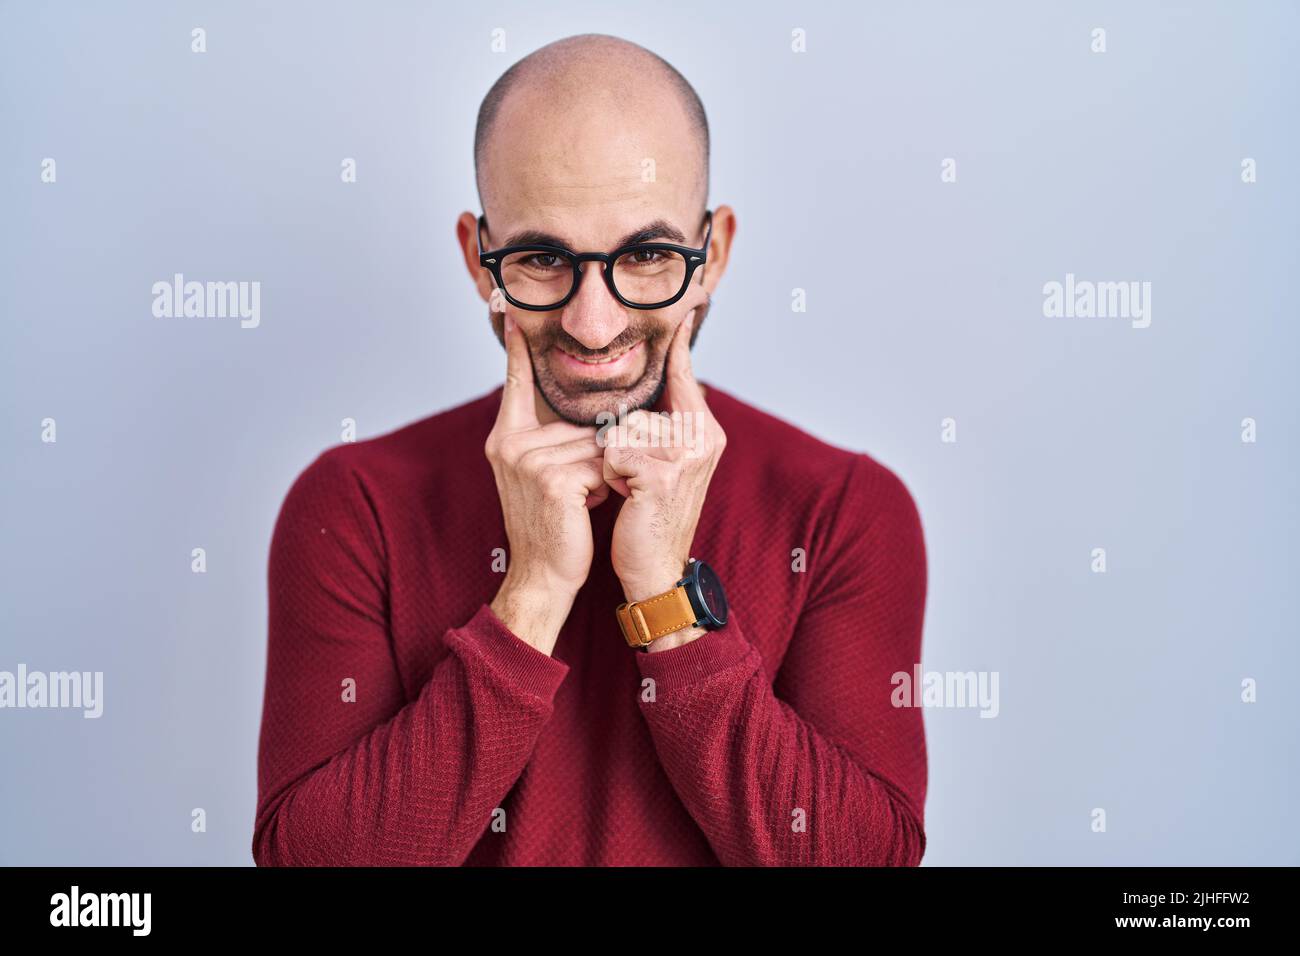 Young bald man with beard standing over white background wearing glasses smiling with open mouth, fingers pointing and forcing cheerful smile Stock Photo